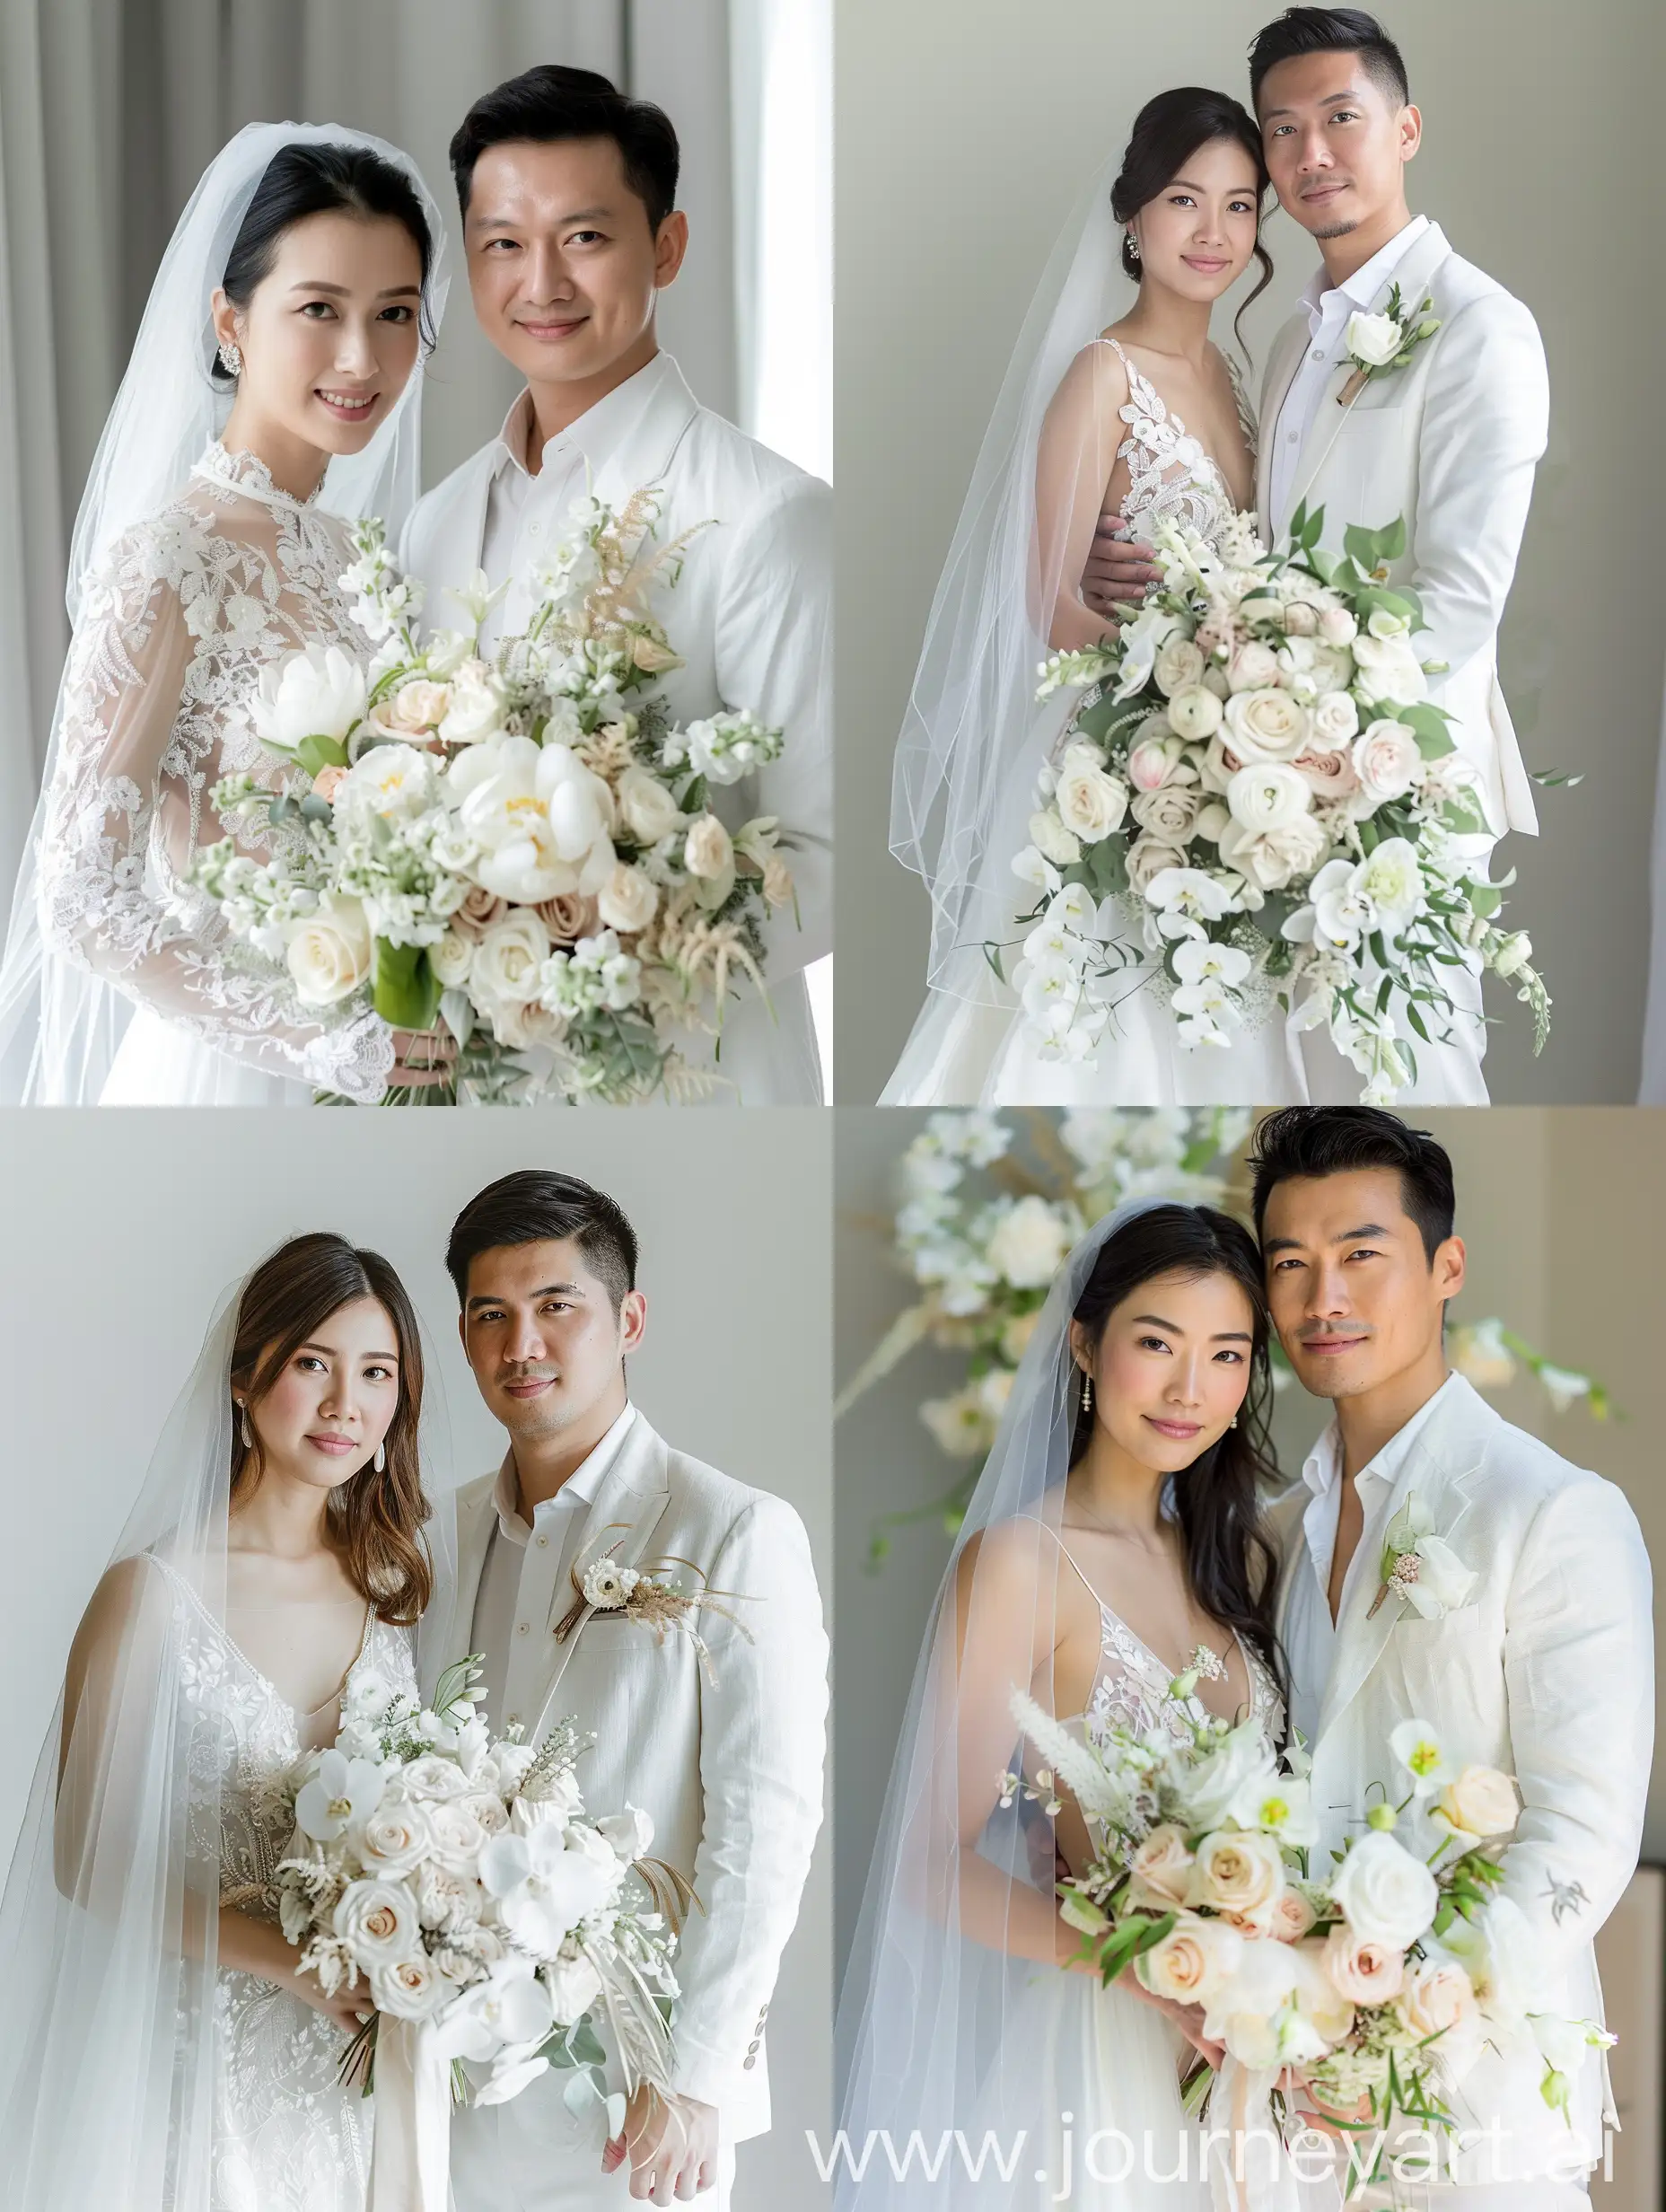 The 8K HD image shows the couple wearing traditional wedding attire, posing together. The bride wore a white dress with a long veil and carried a bouquet of white and light pink flowers. The groom wore a white jacket and trousers. They appeared to be of Asian descent and had warm and friendly facial expressions as they stood side by side, capturing the moments of their joyful wedding day.